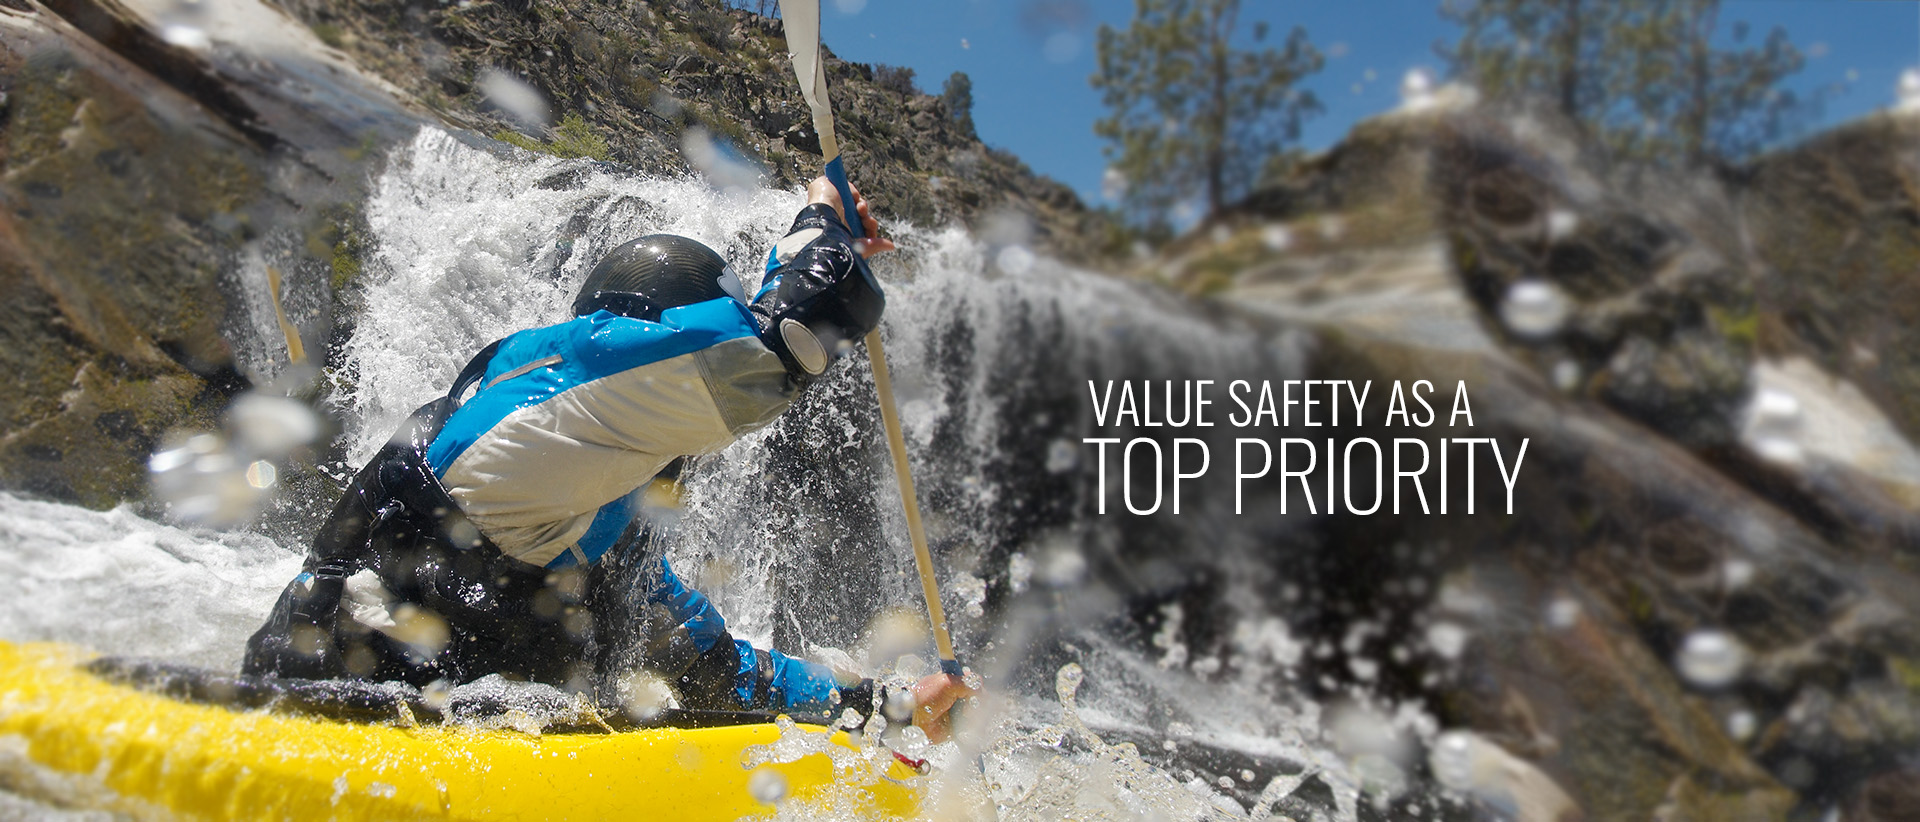 TOP PRIORITY-VALUE SAFETY AS A